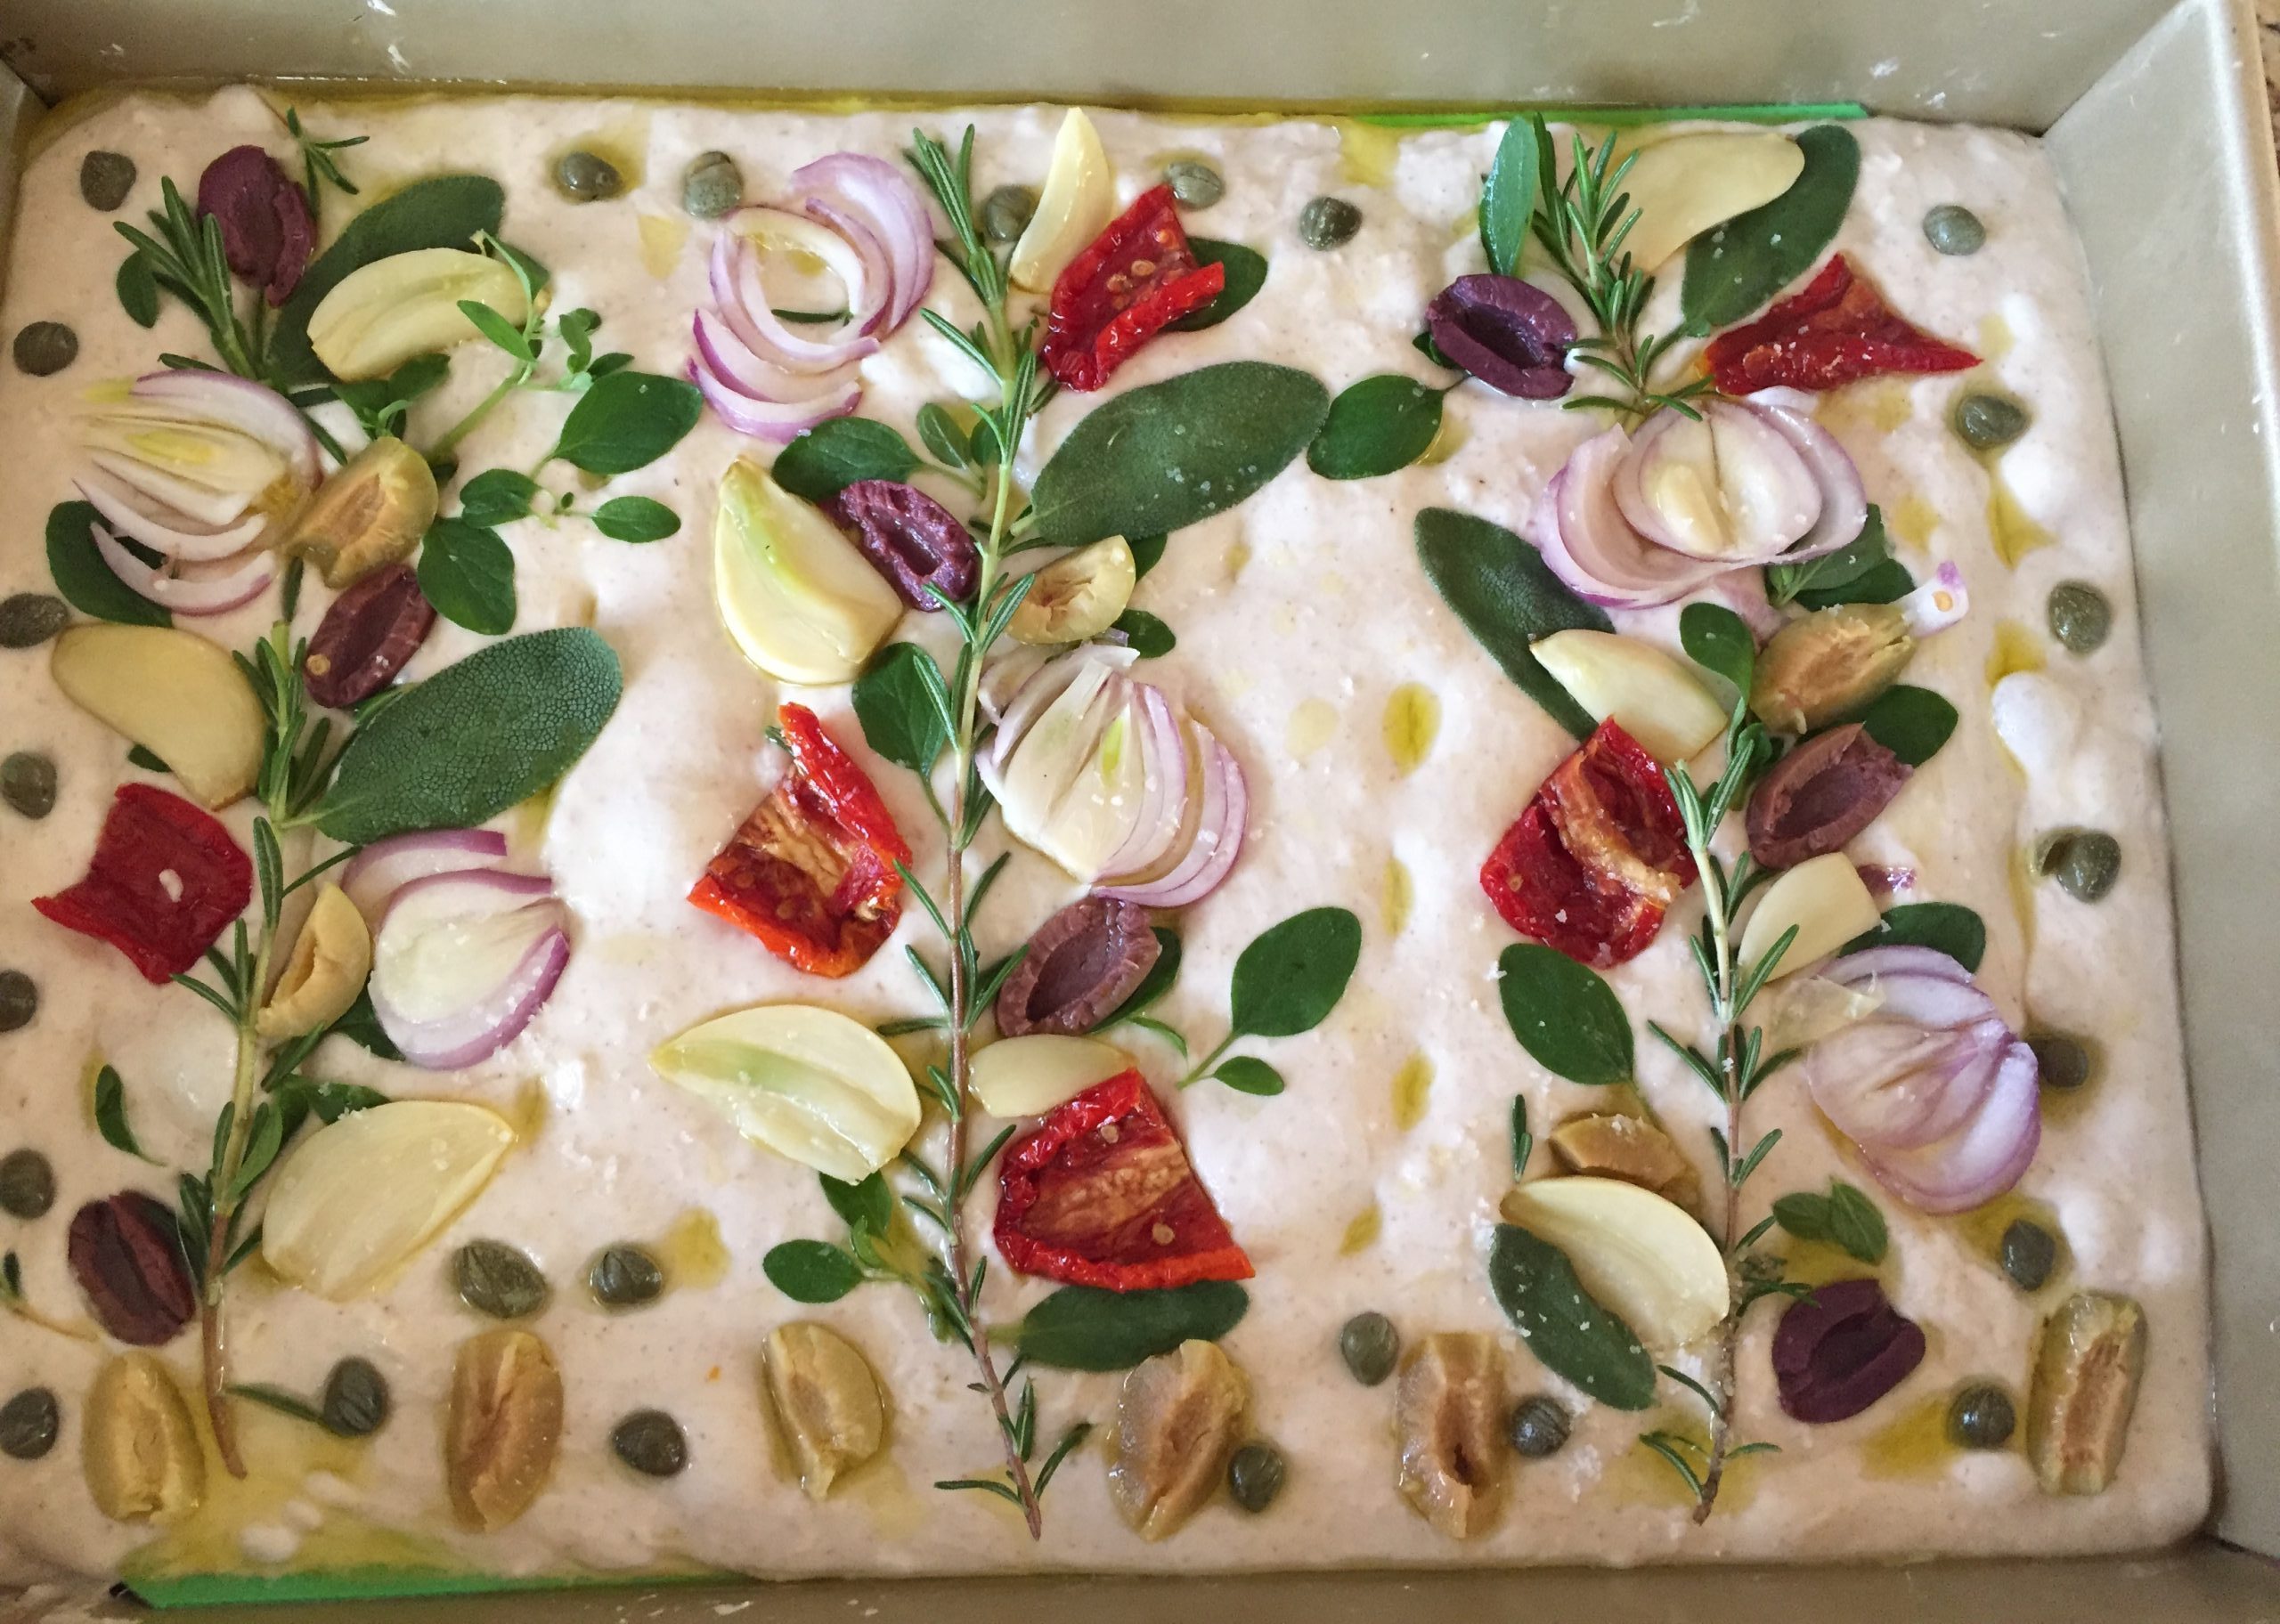 Uncooked focaccia with toppings